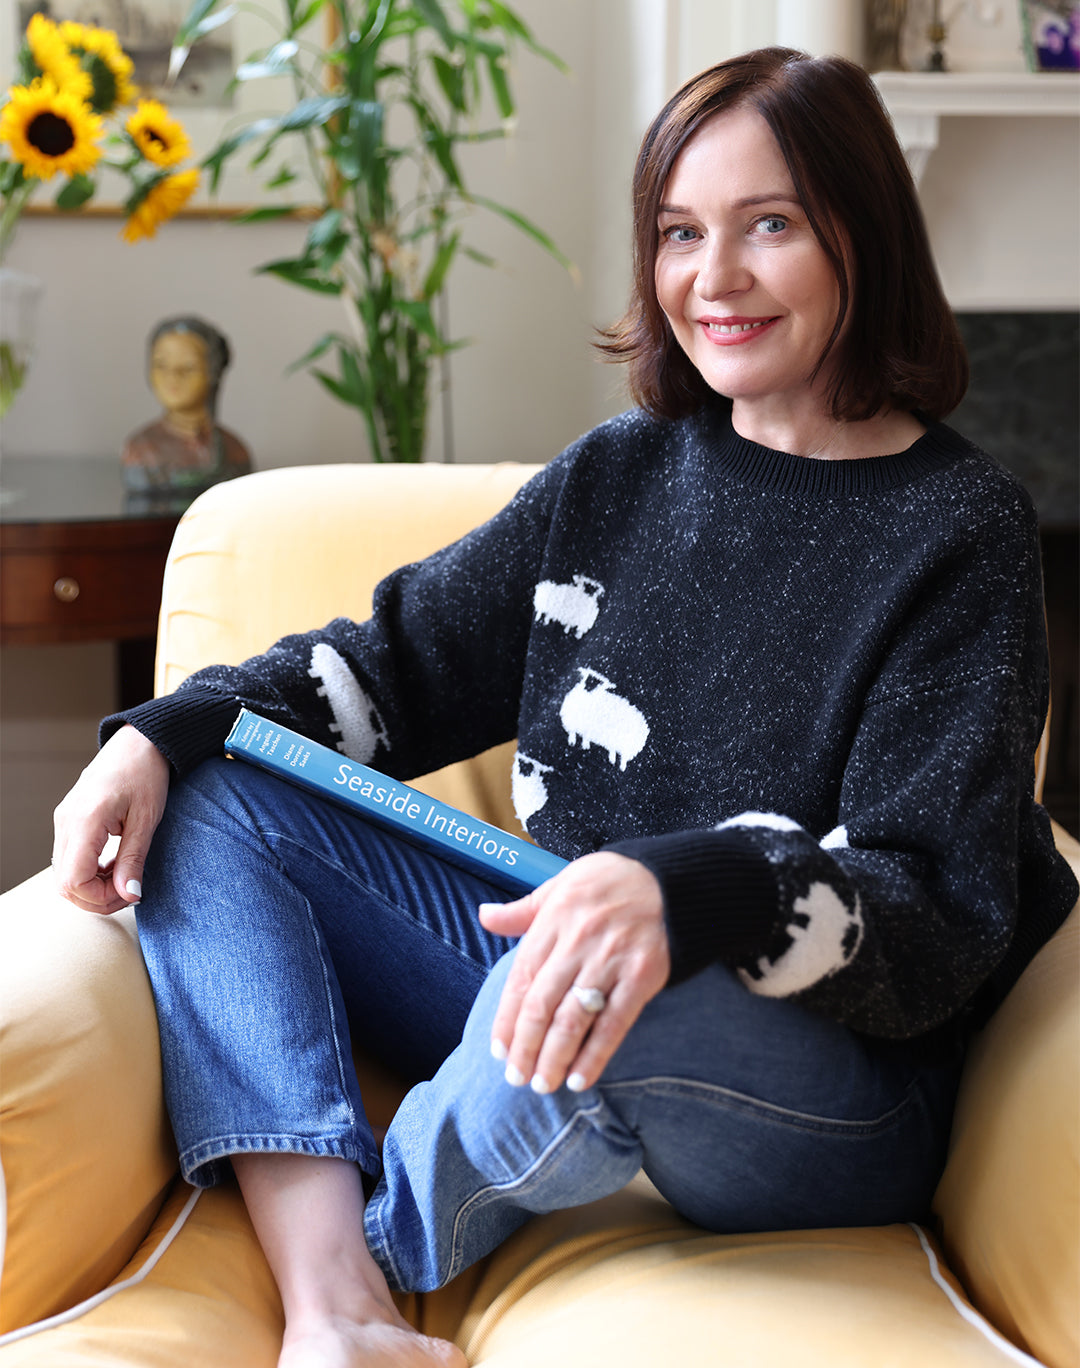 Margaret O'Leary sitting cross-legged on a yellow armchair. She is wearing a black knit jumper with white sheep on it and holding a blue book with the title "Seaside interiors" printed on the spine.